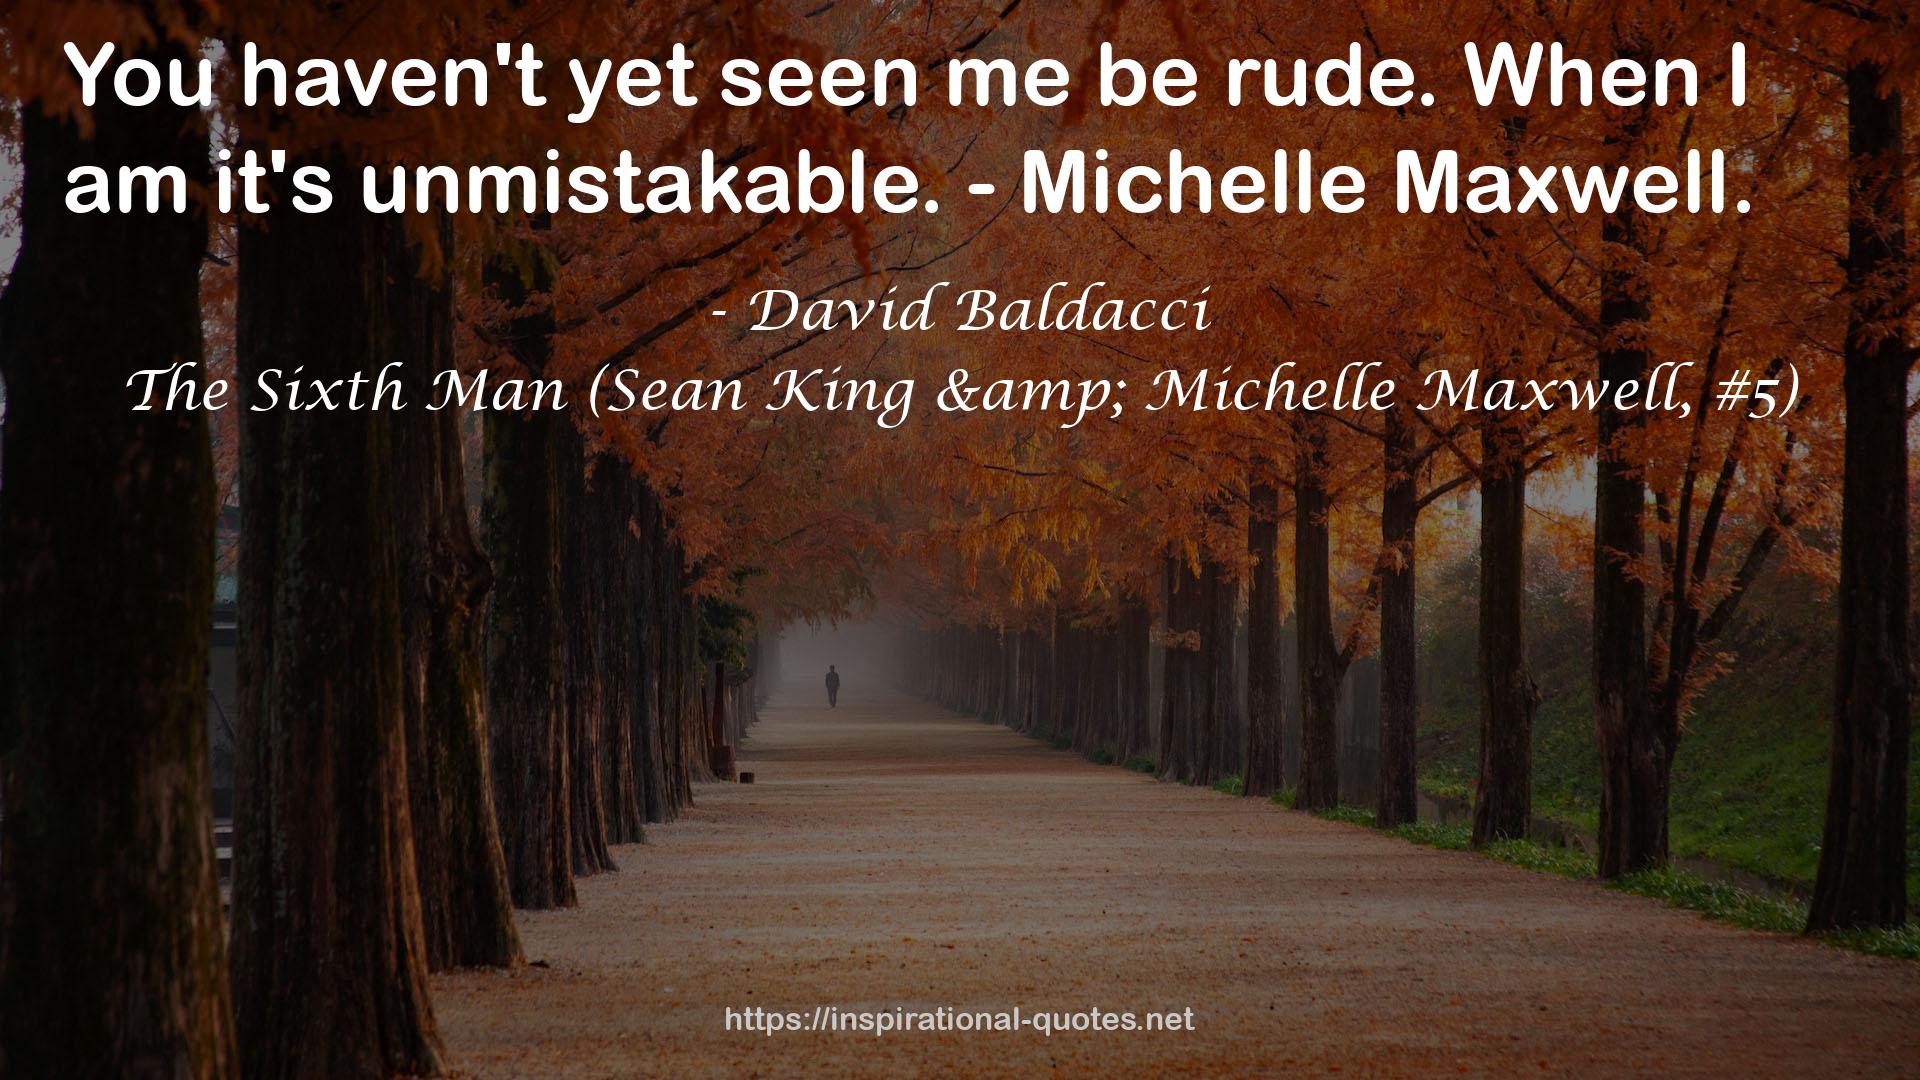 The Sixth Man (Sean King & Michelle Maxwell, #5) QUOTES